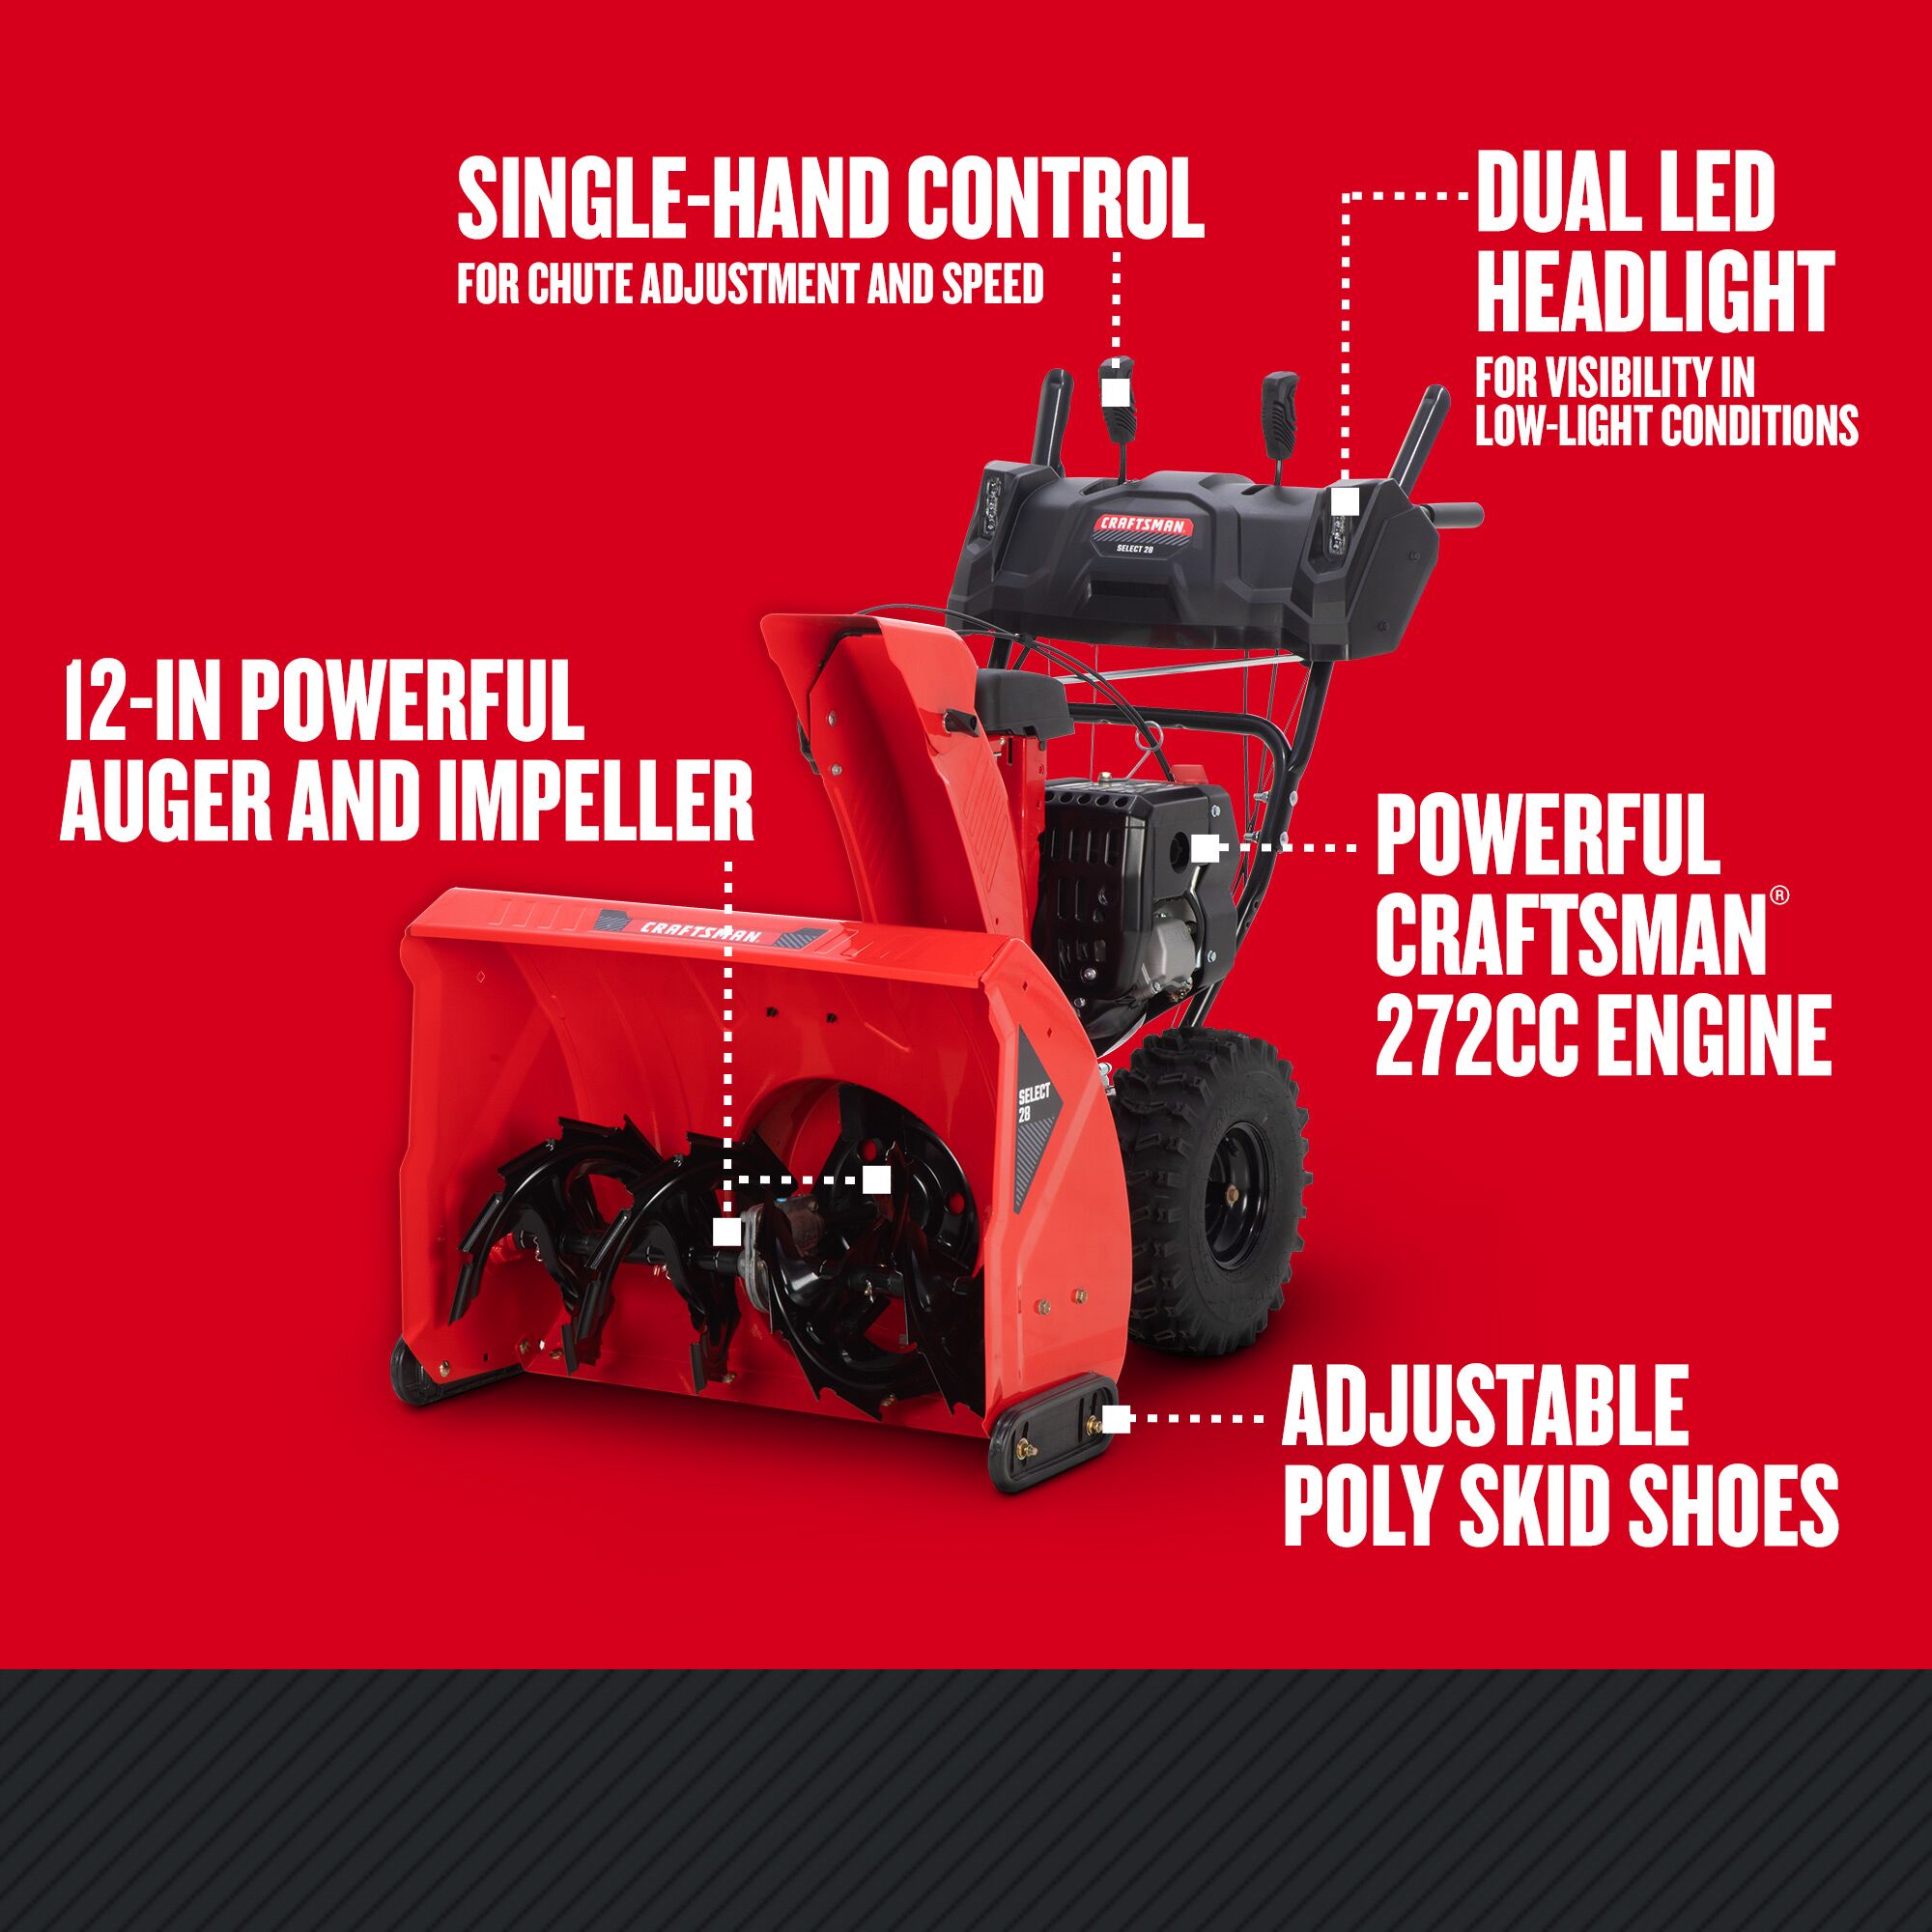 CRAFTSMAN 28-in. 272-cc Two Stage Gas Snow Blower graphic highlighting key features